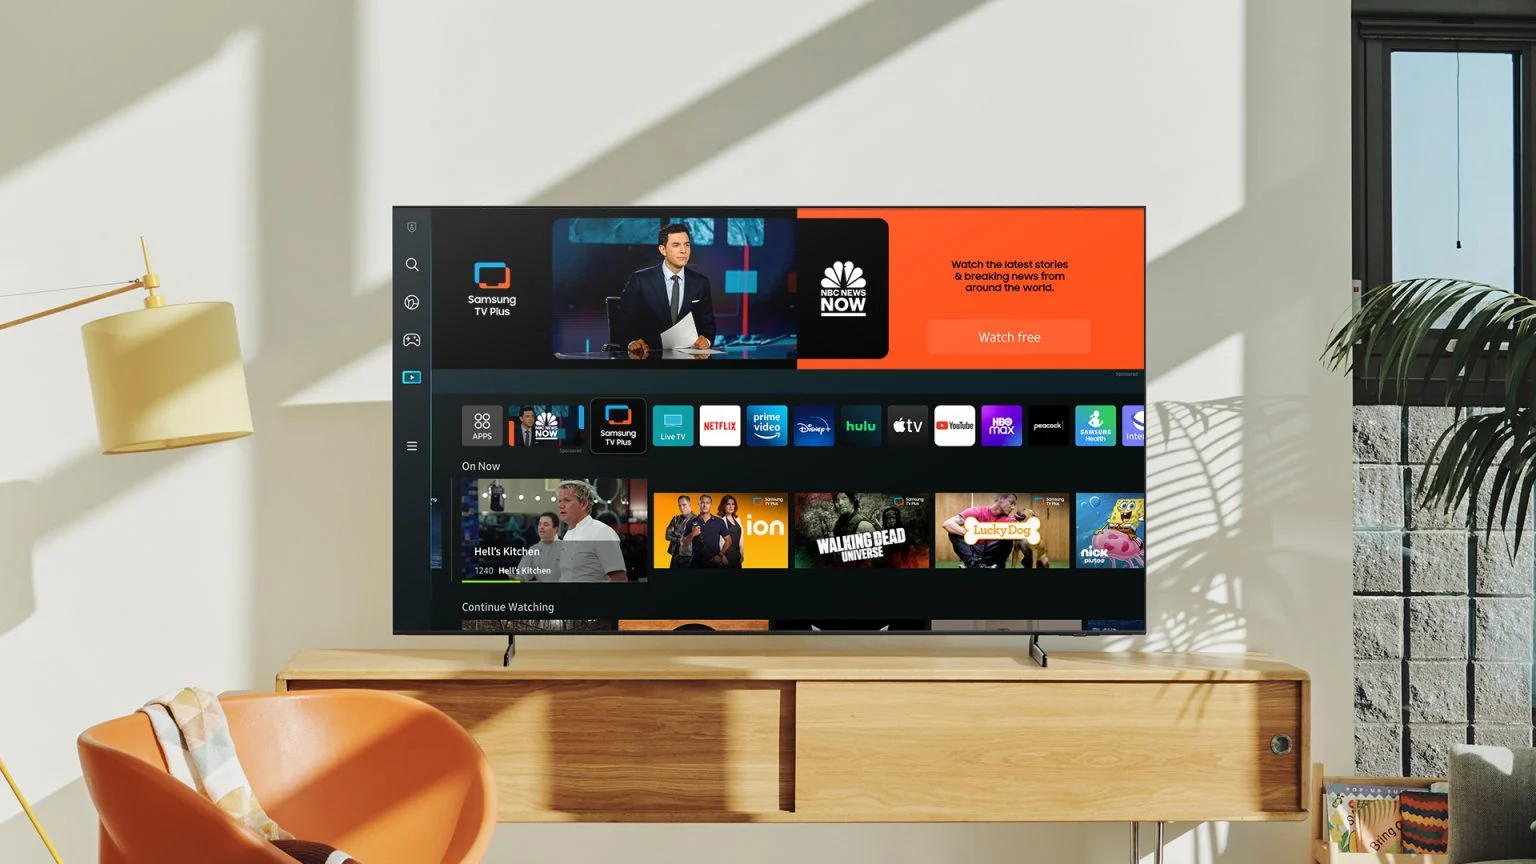 How To Download Youtube TV On Smart TV